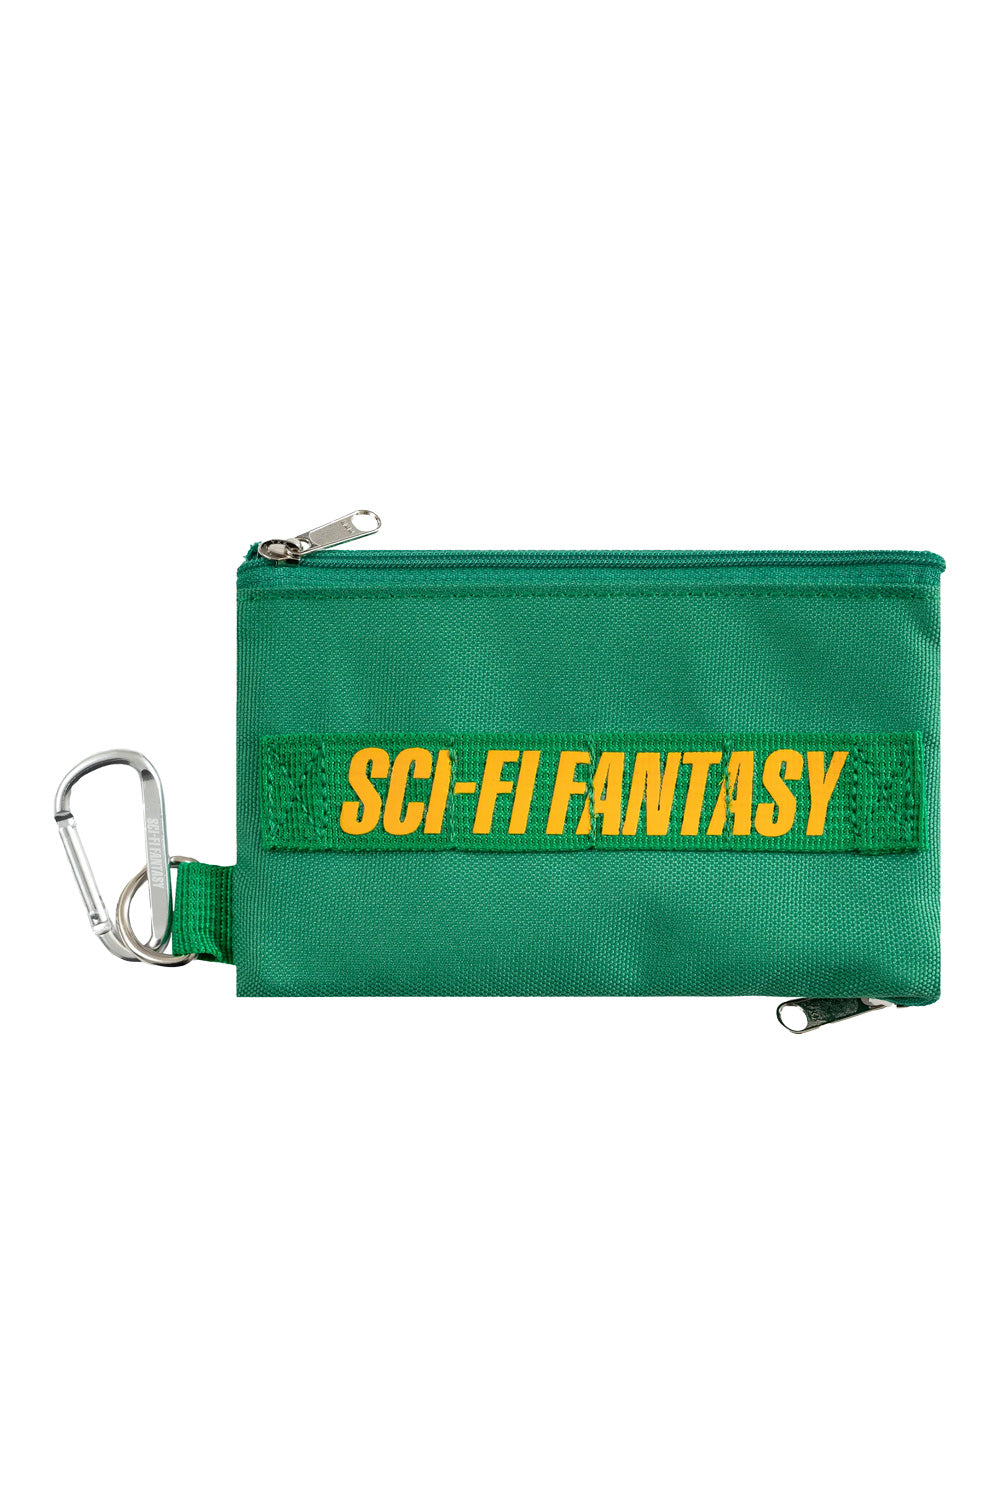 Sci-Fi Fantasy Carry-All Pouch Green - BONKERS